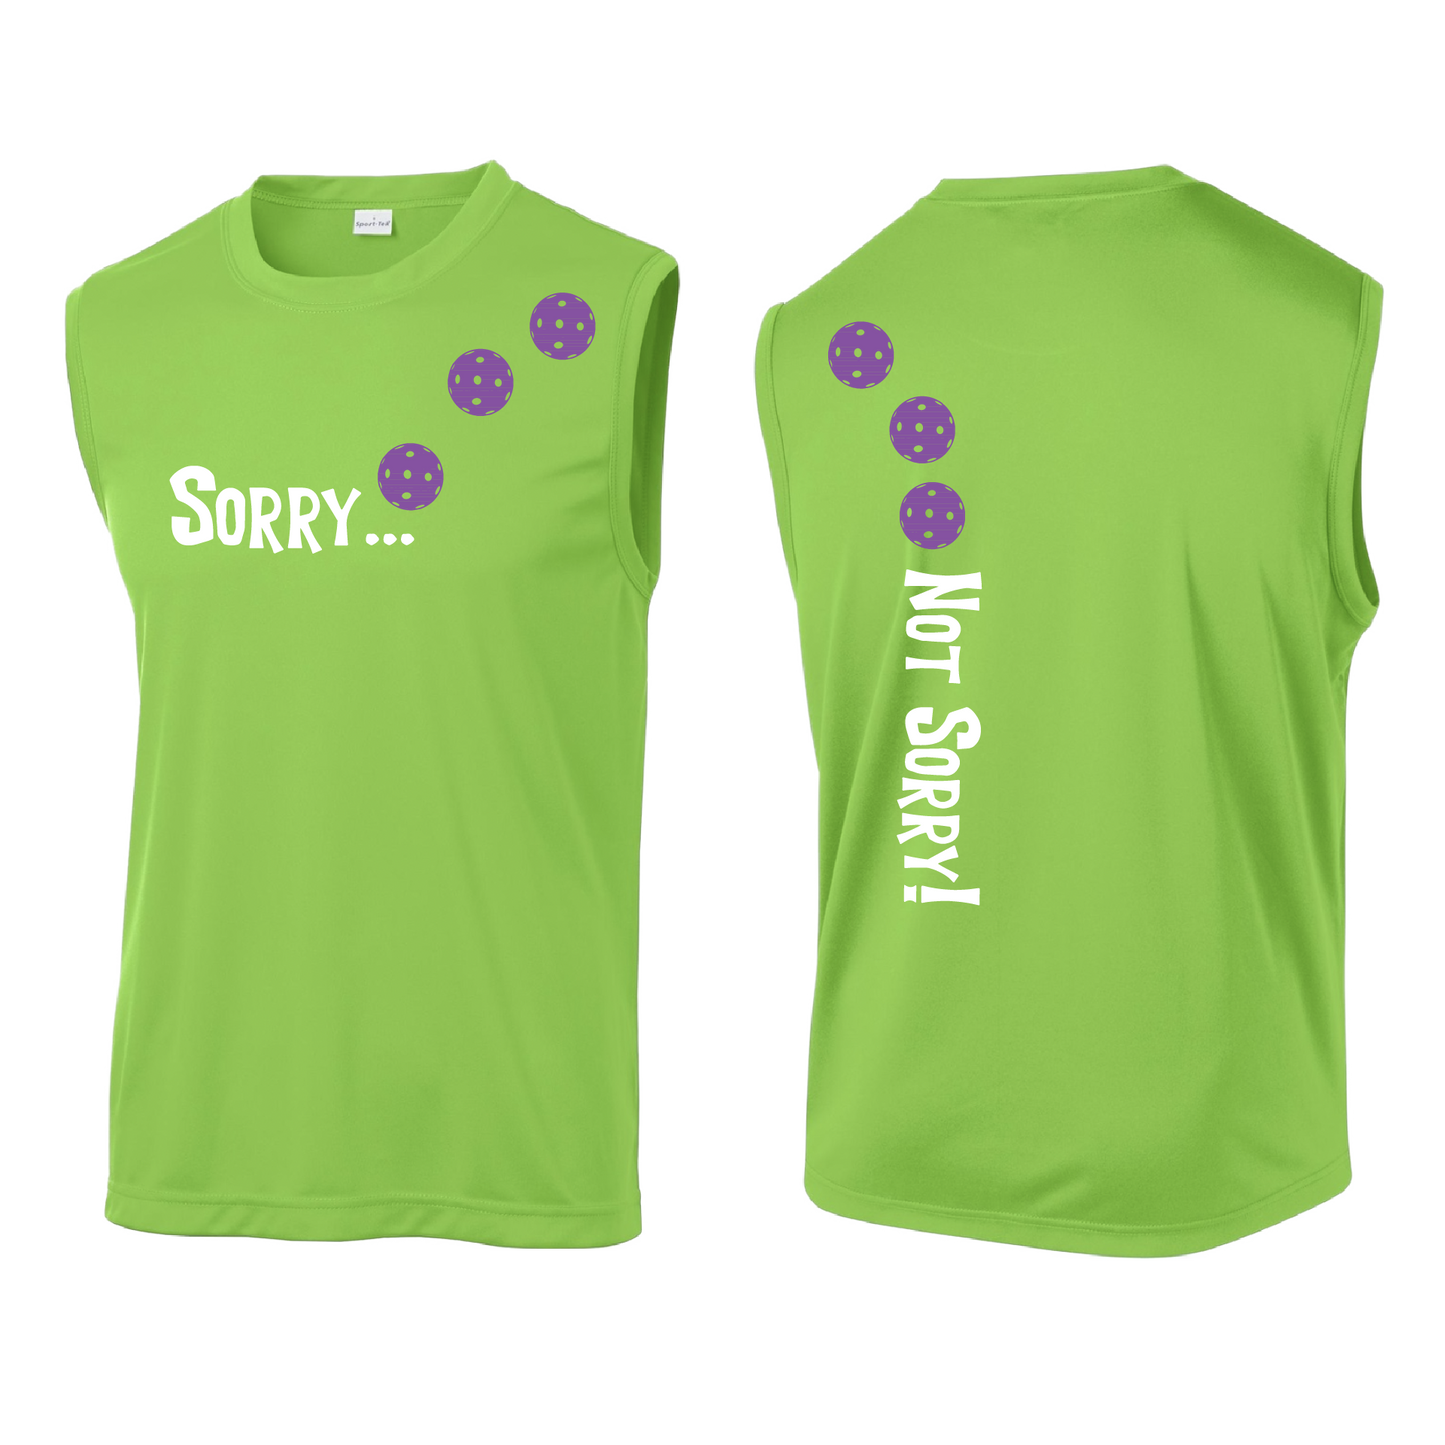 Design: Sorry...Not Sorry! with Customizable Ball Color - Choose: Green, Orange or Purple Men's Styles: Sleeveless  Shirts are lightweight, roomy and highly breathable. These moisture-wicking shirts are designed for athletic performance. They feature PosiCharge technology to lock in color and prevent logos from fading. Removable tag and set-in sleeves for comfort.